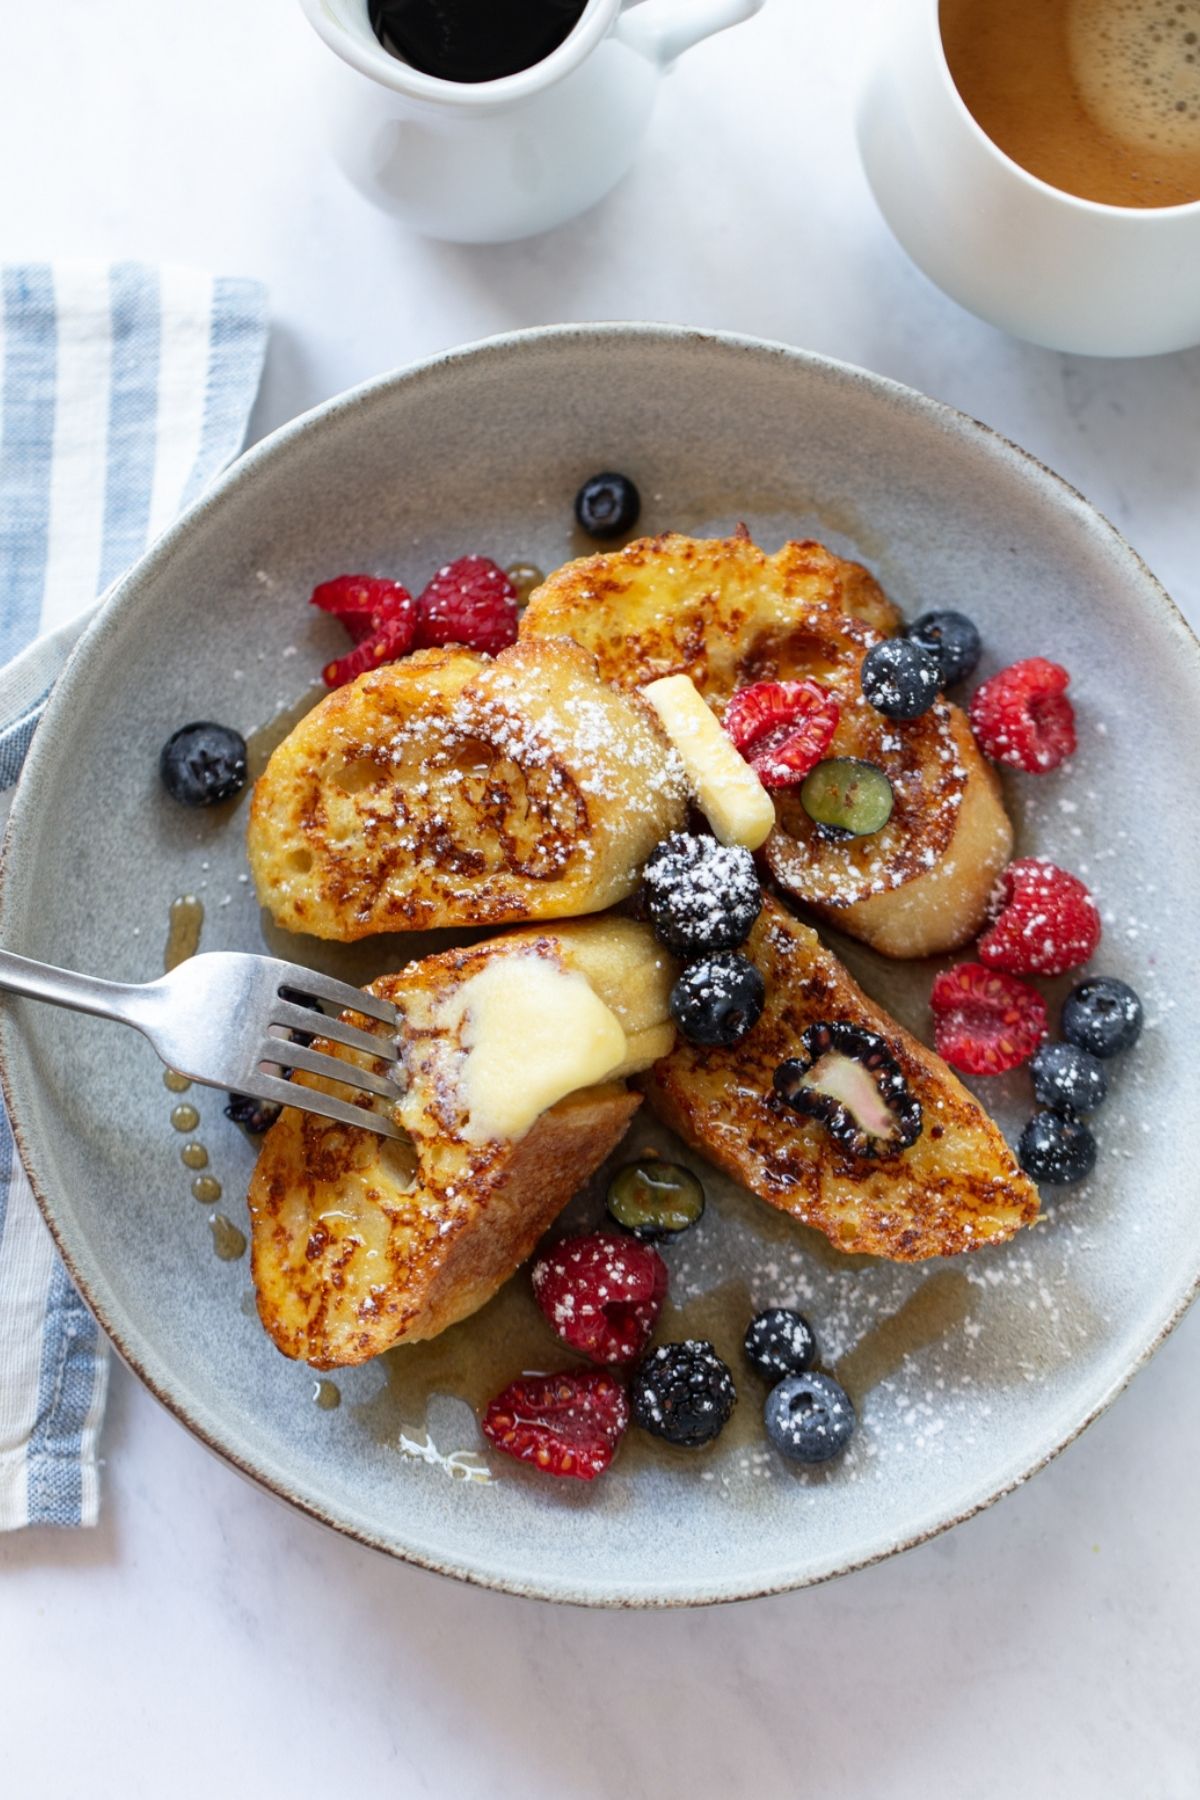 Sourdough French toast topped with berries and butter.